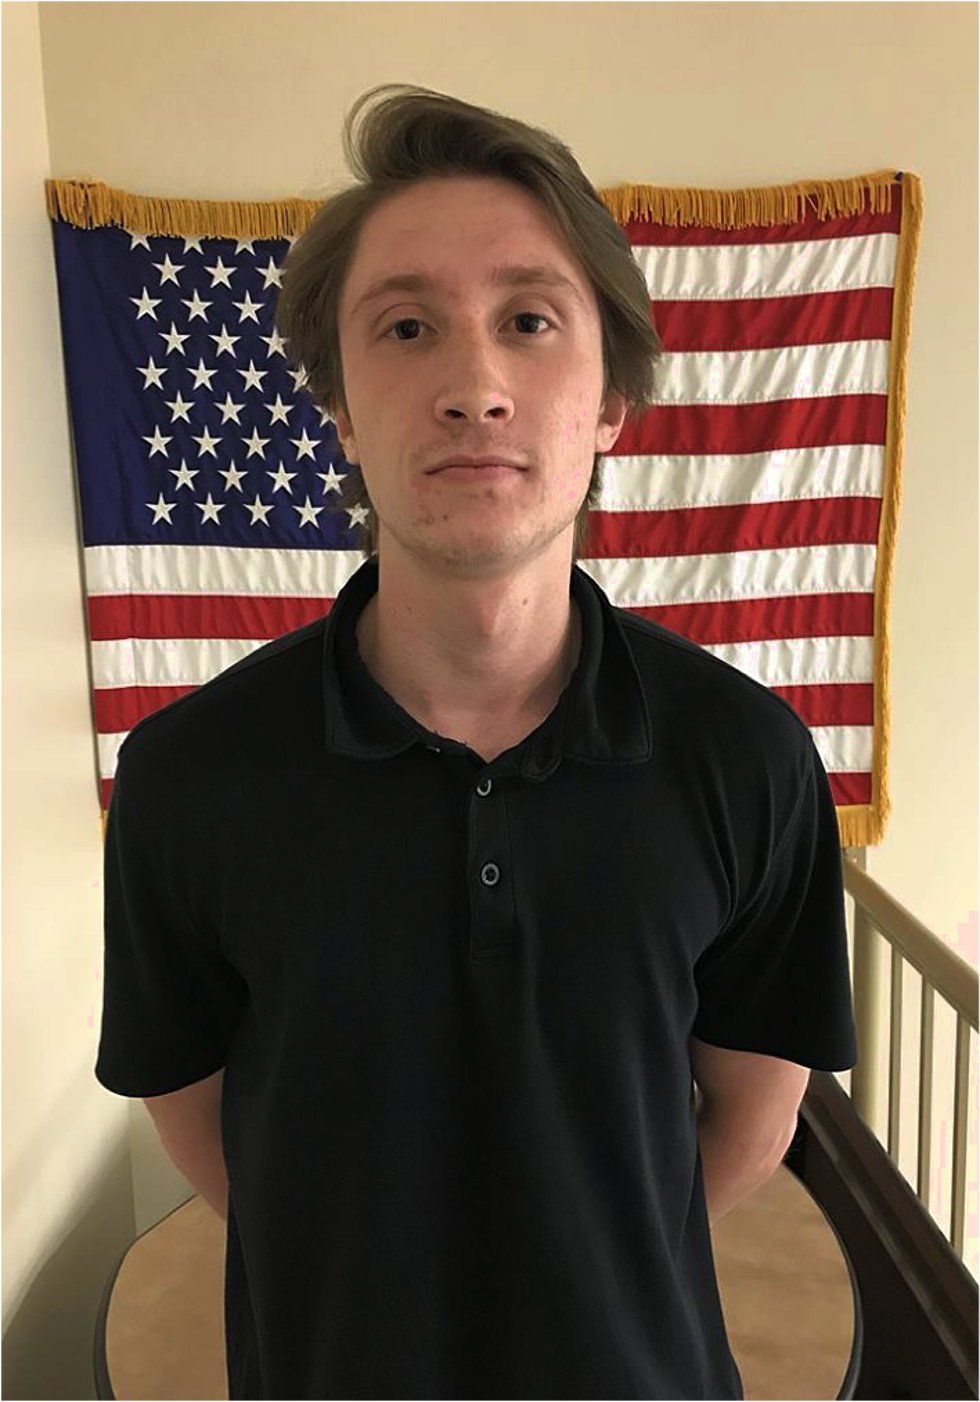 Pinelands Regional&#8217;s Daniel Melega Joins United States Army [Recruit of the Week]